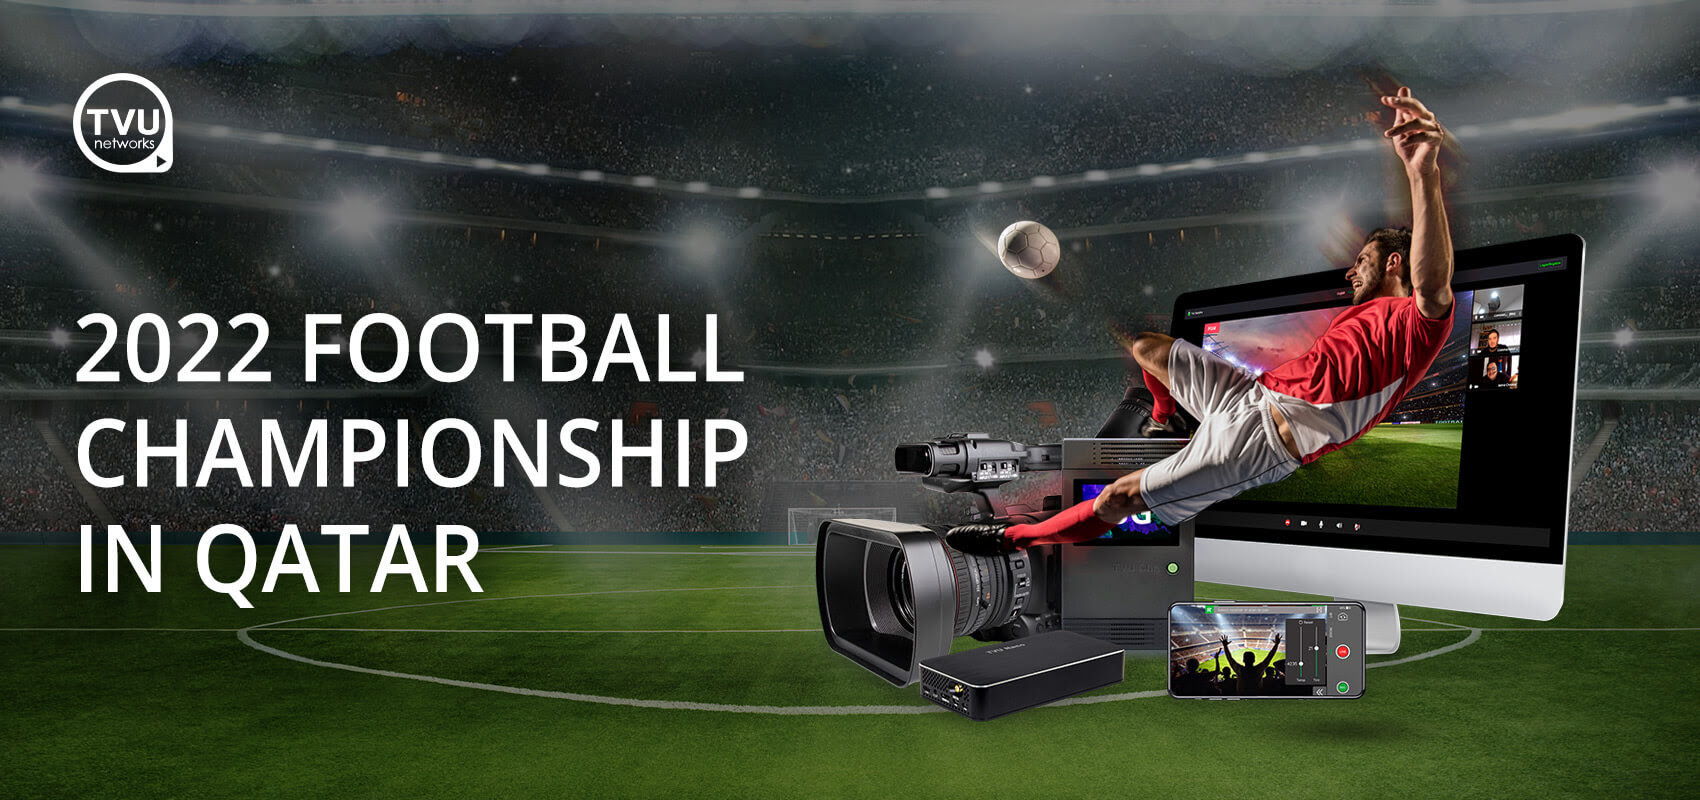 TVU Networks To Provide Remote Production for Customers, Broadcasters at 2022 Football Championship in Qatar